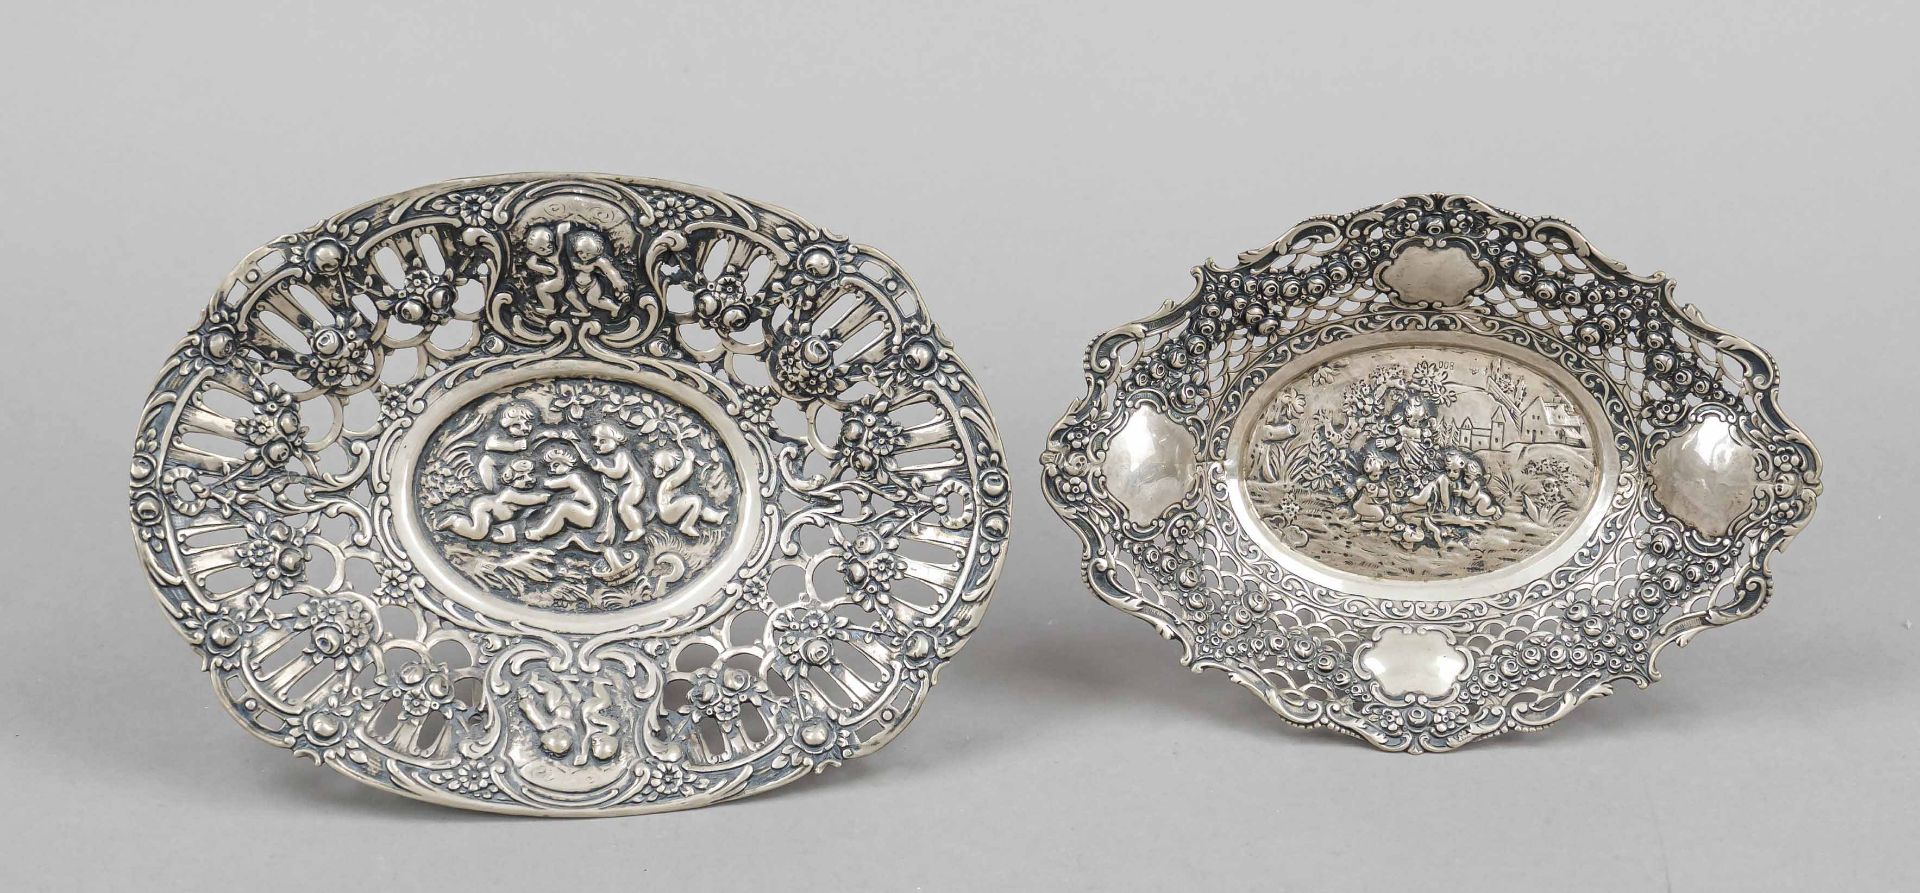 Two oval openwork baskets, German, 20th century, silver 800/000, each with openwork flag with floral